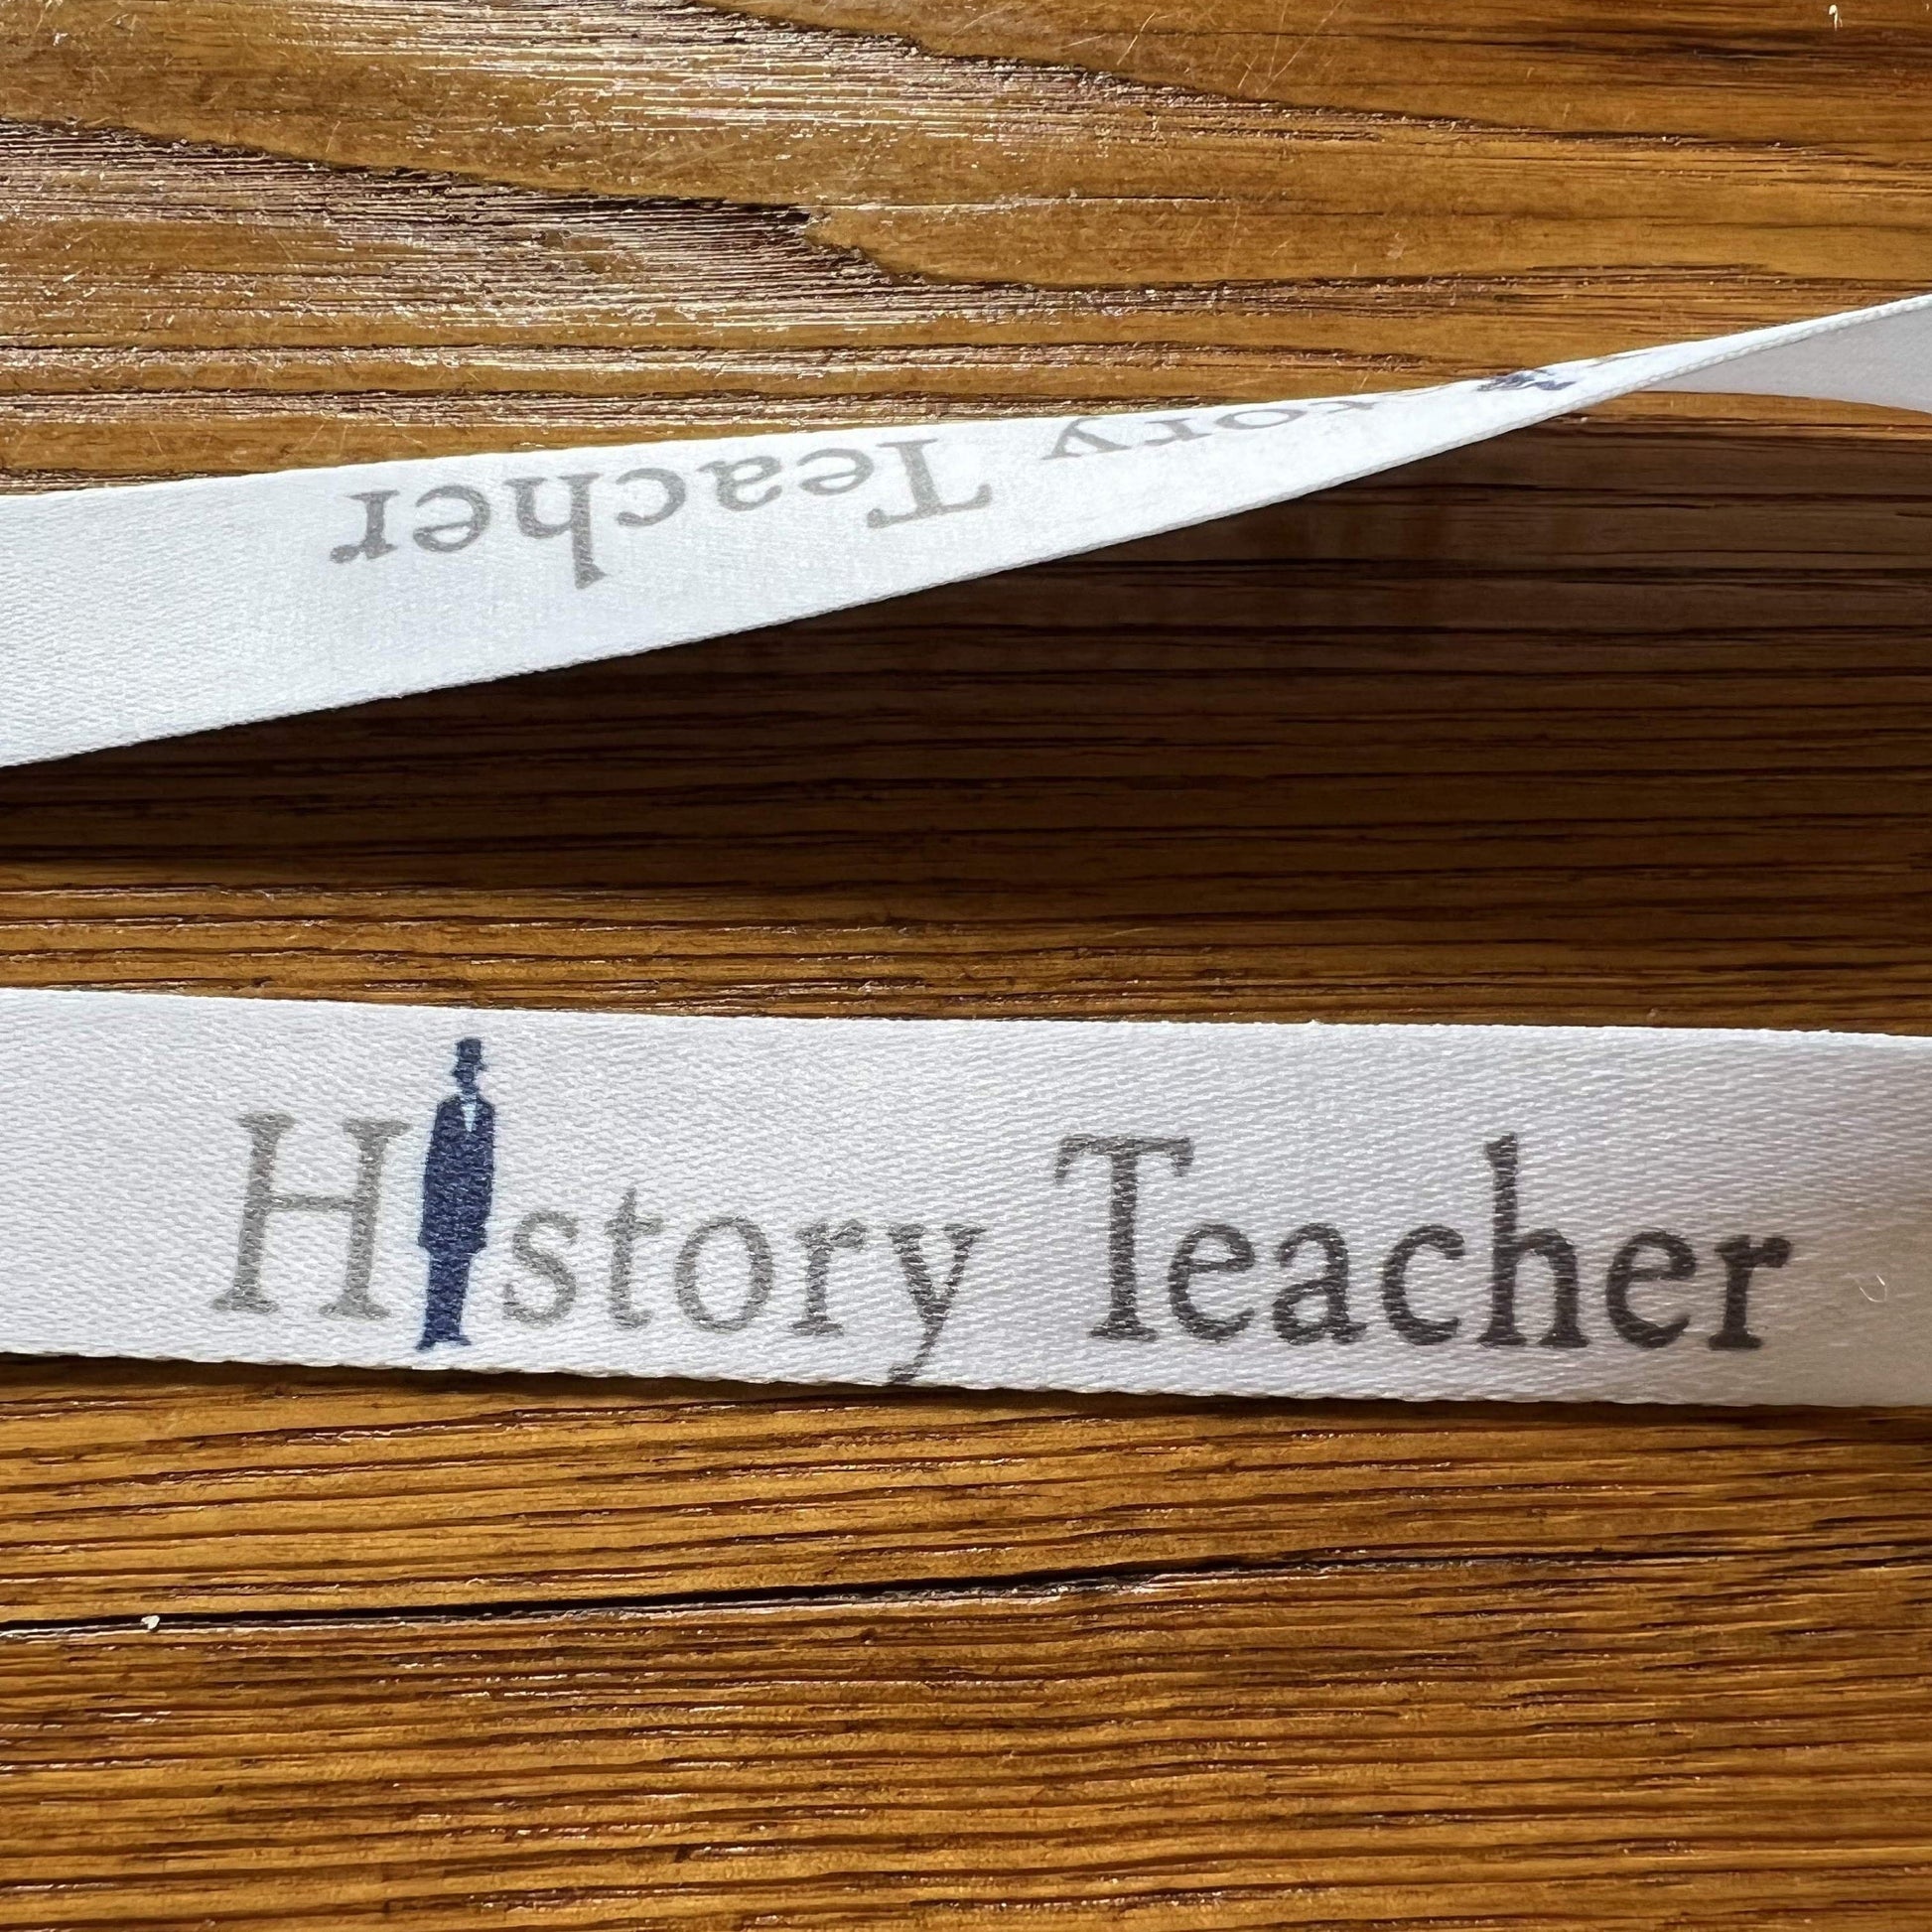 History Teacher Lanyard with Abraham Lincoln from the History List store